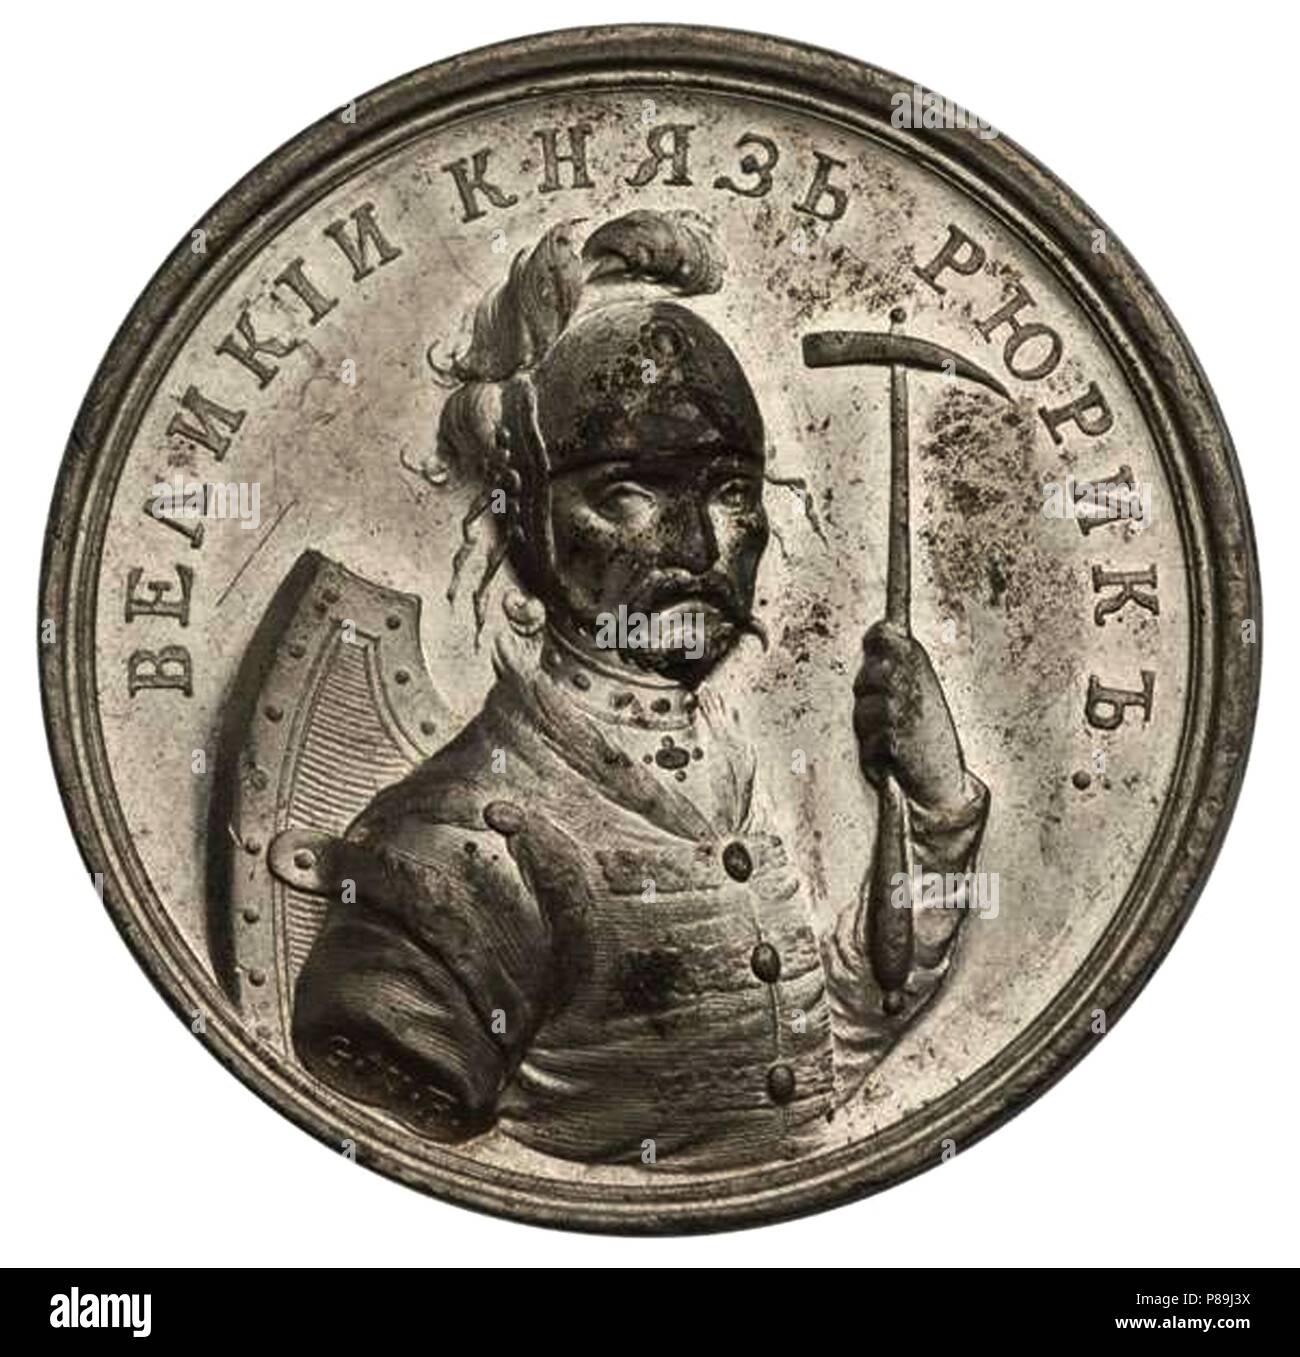 Prince Rurik, founder of Kievan Rus (from the Historical Medal Series). Museum: PRIVATE COLLECTION. Stock Photo